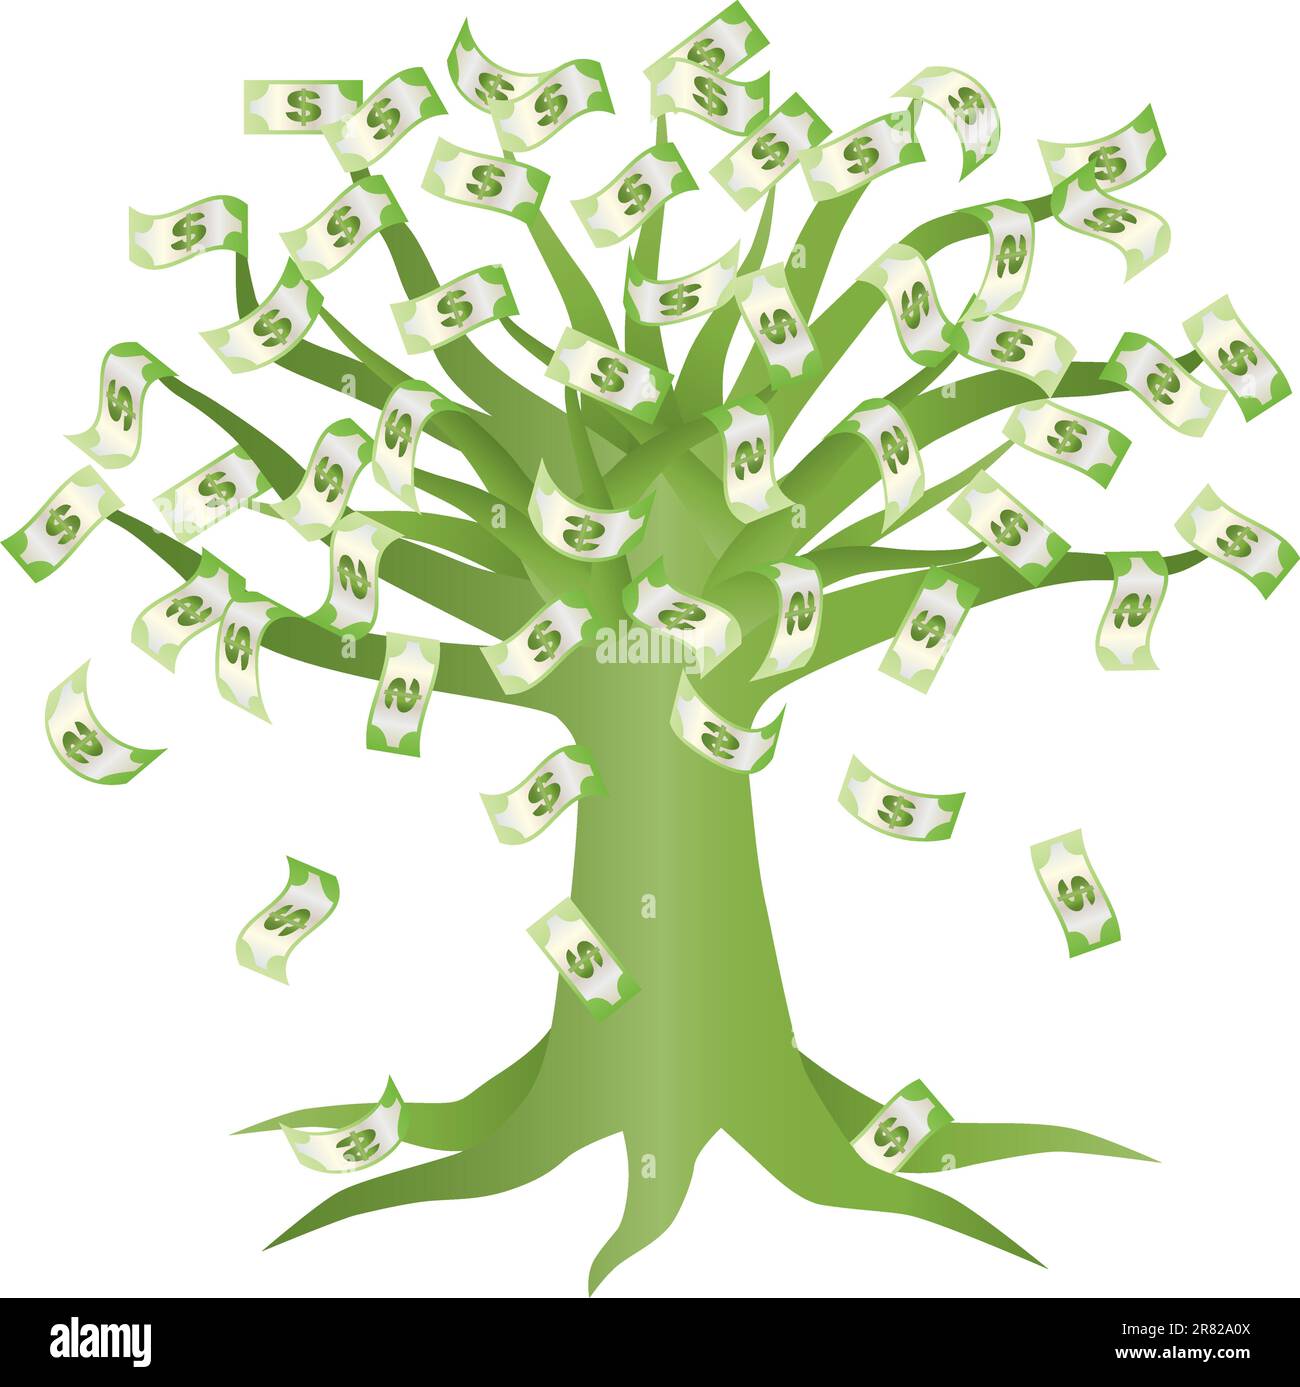 Money Growing on Green Tree Illustration Isolated on White Background Stock Vector